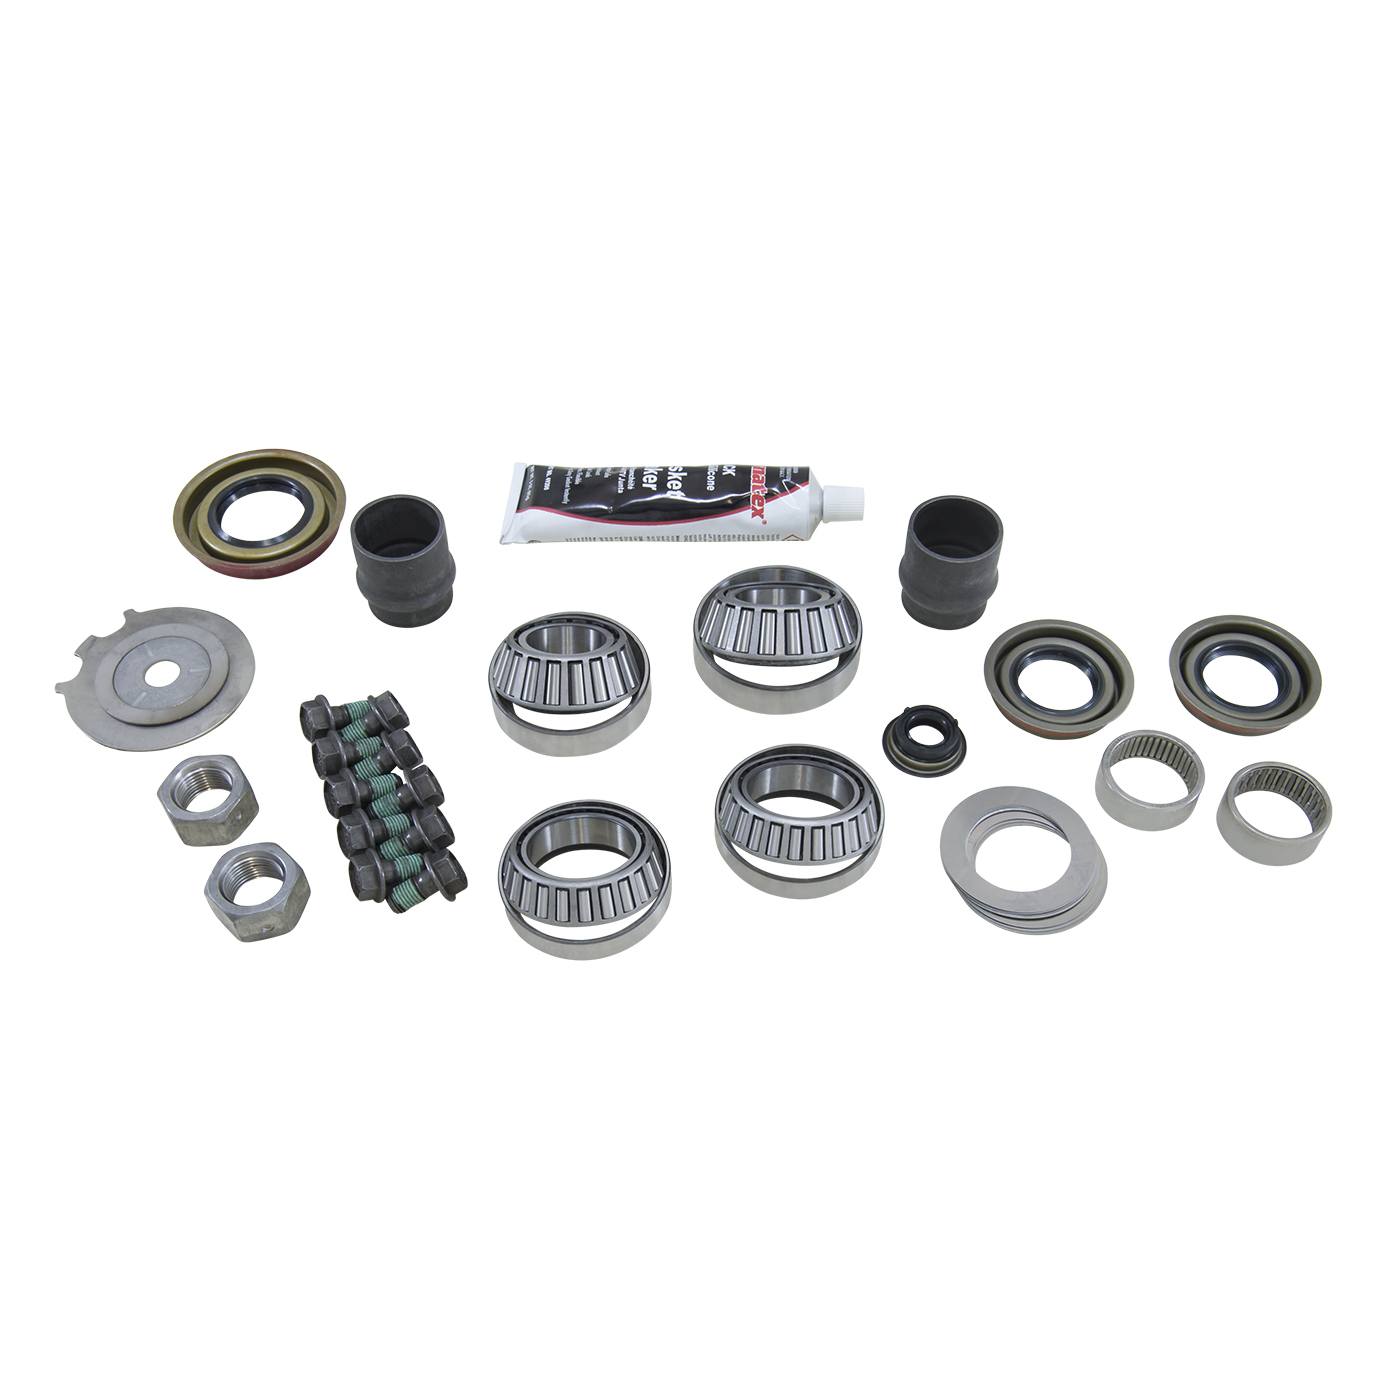 Yukon Master Overhaul kit for '83-'97 GM S10 and S15 7.2" IFS differential 